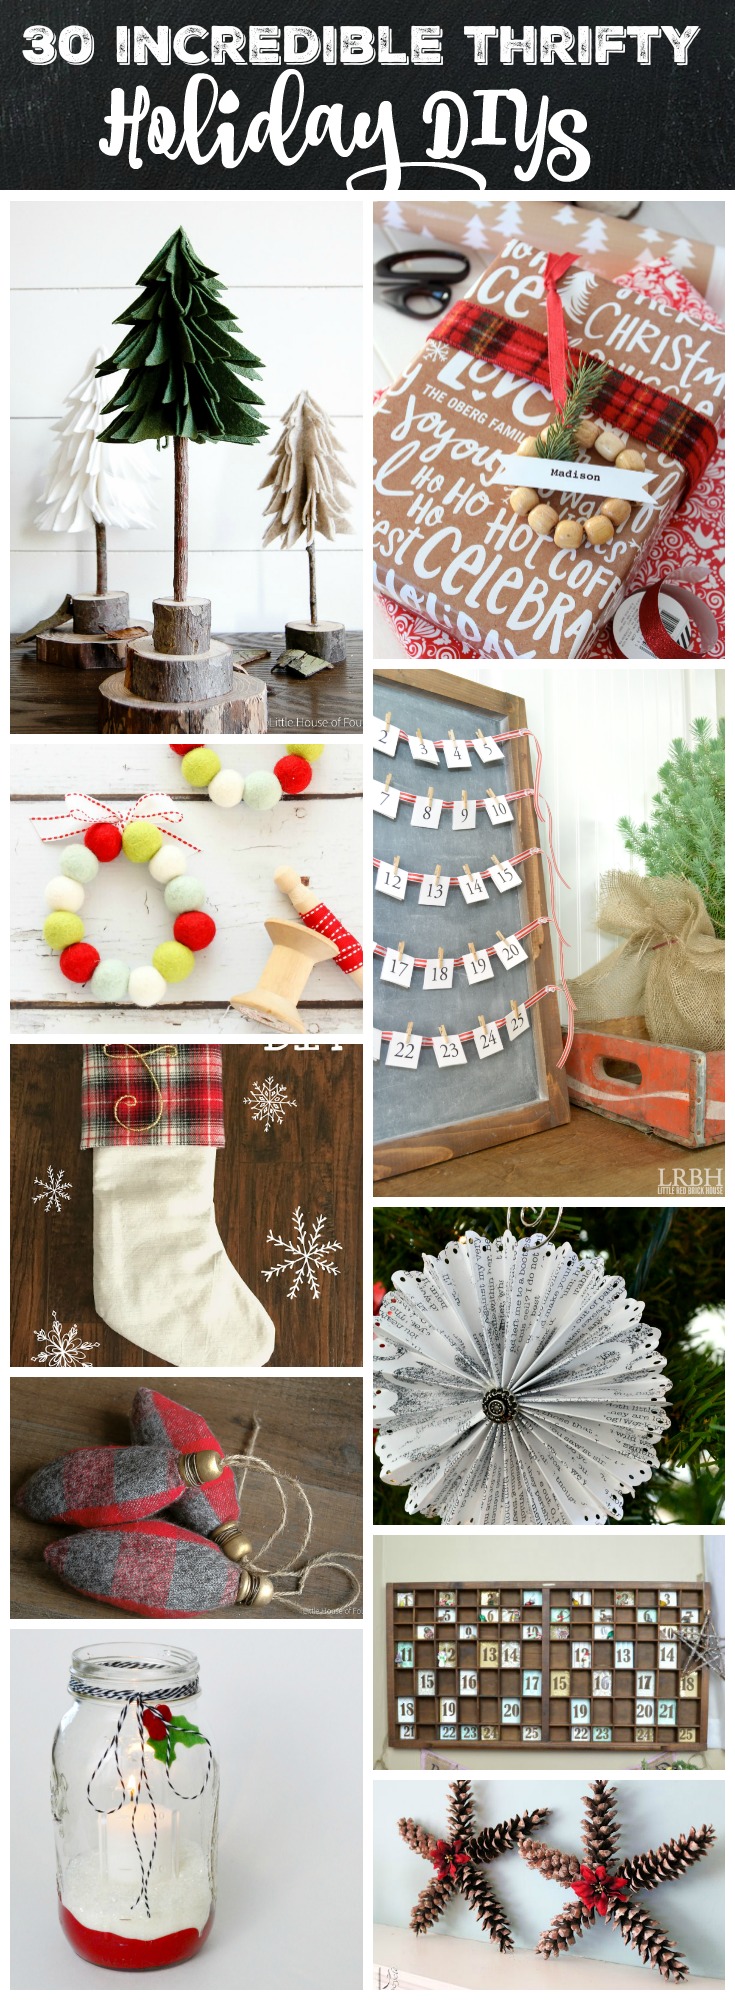 You will love these 30 Incredible Thrifty Holiday DIY Projects at thehappyhousie.com